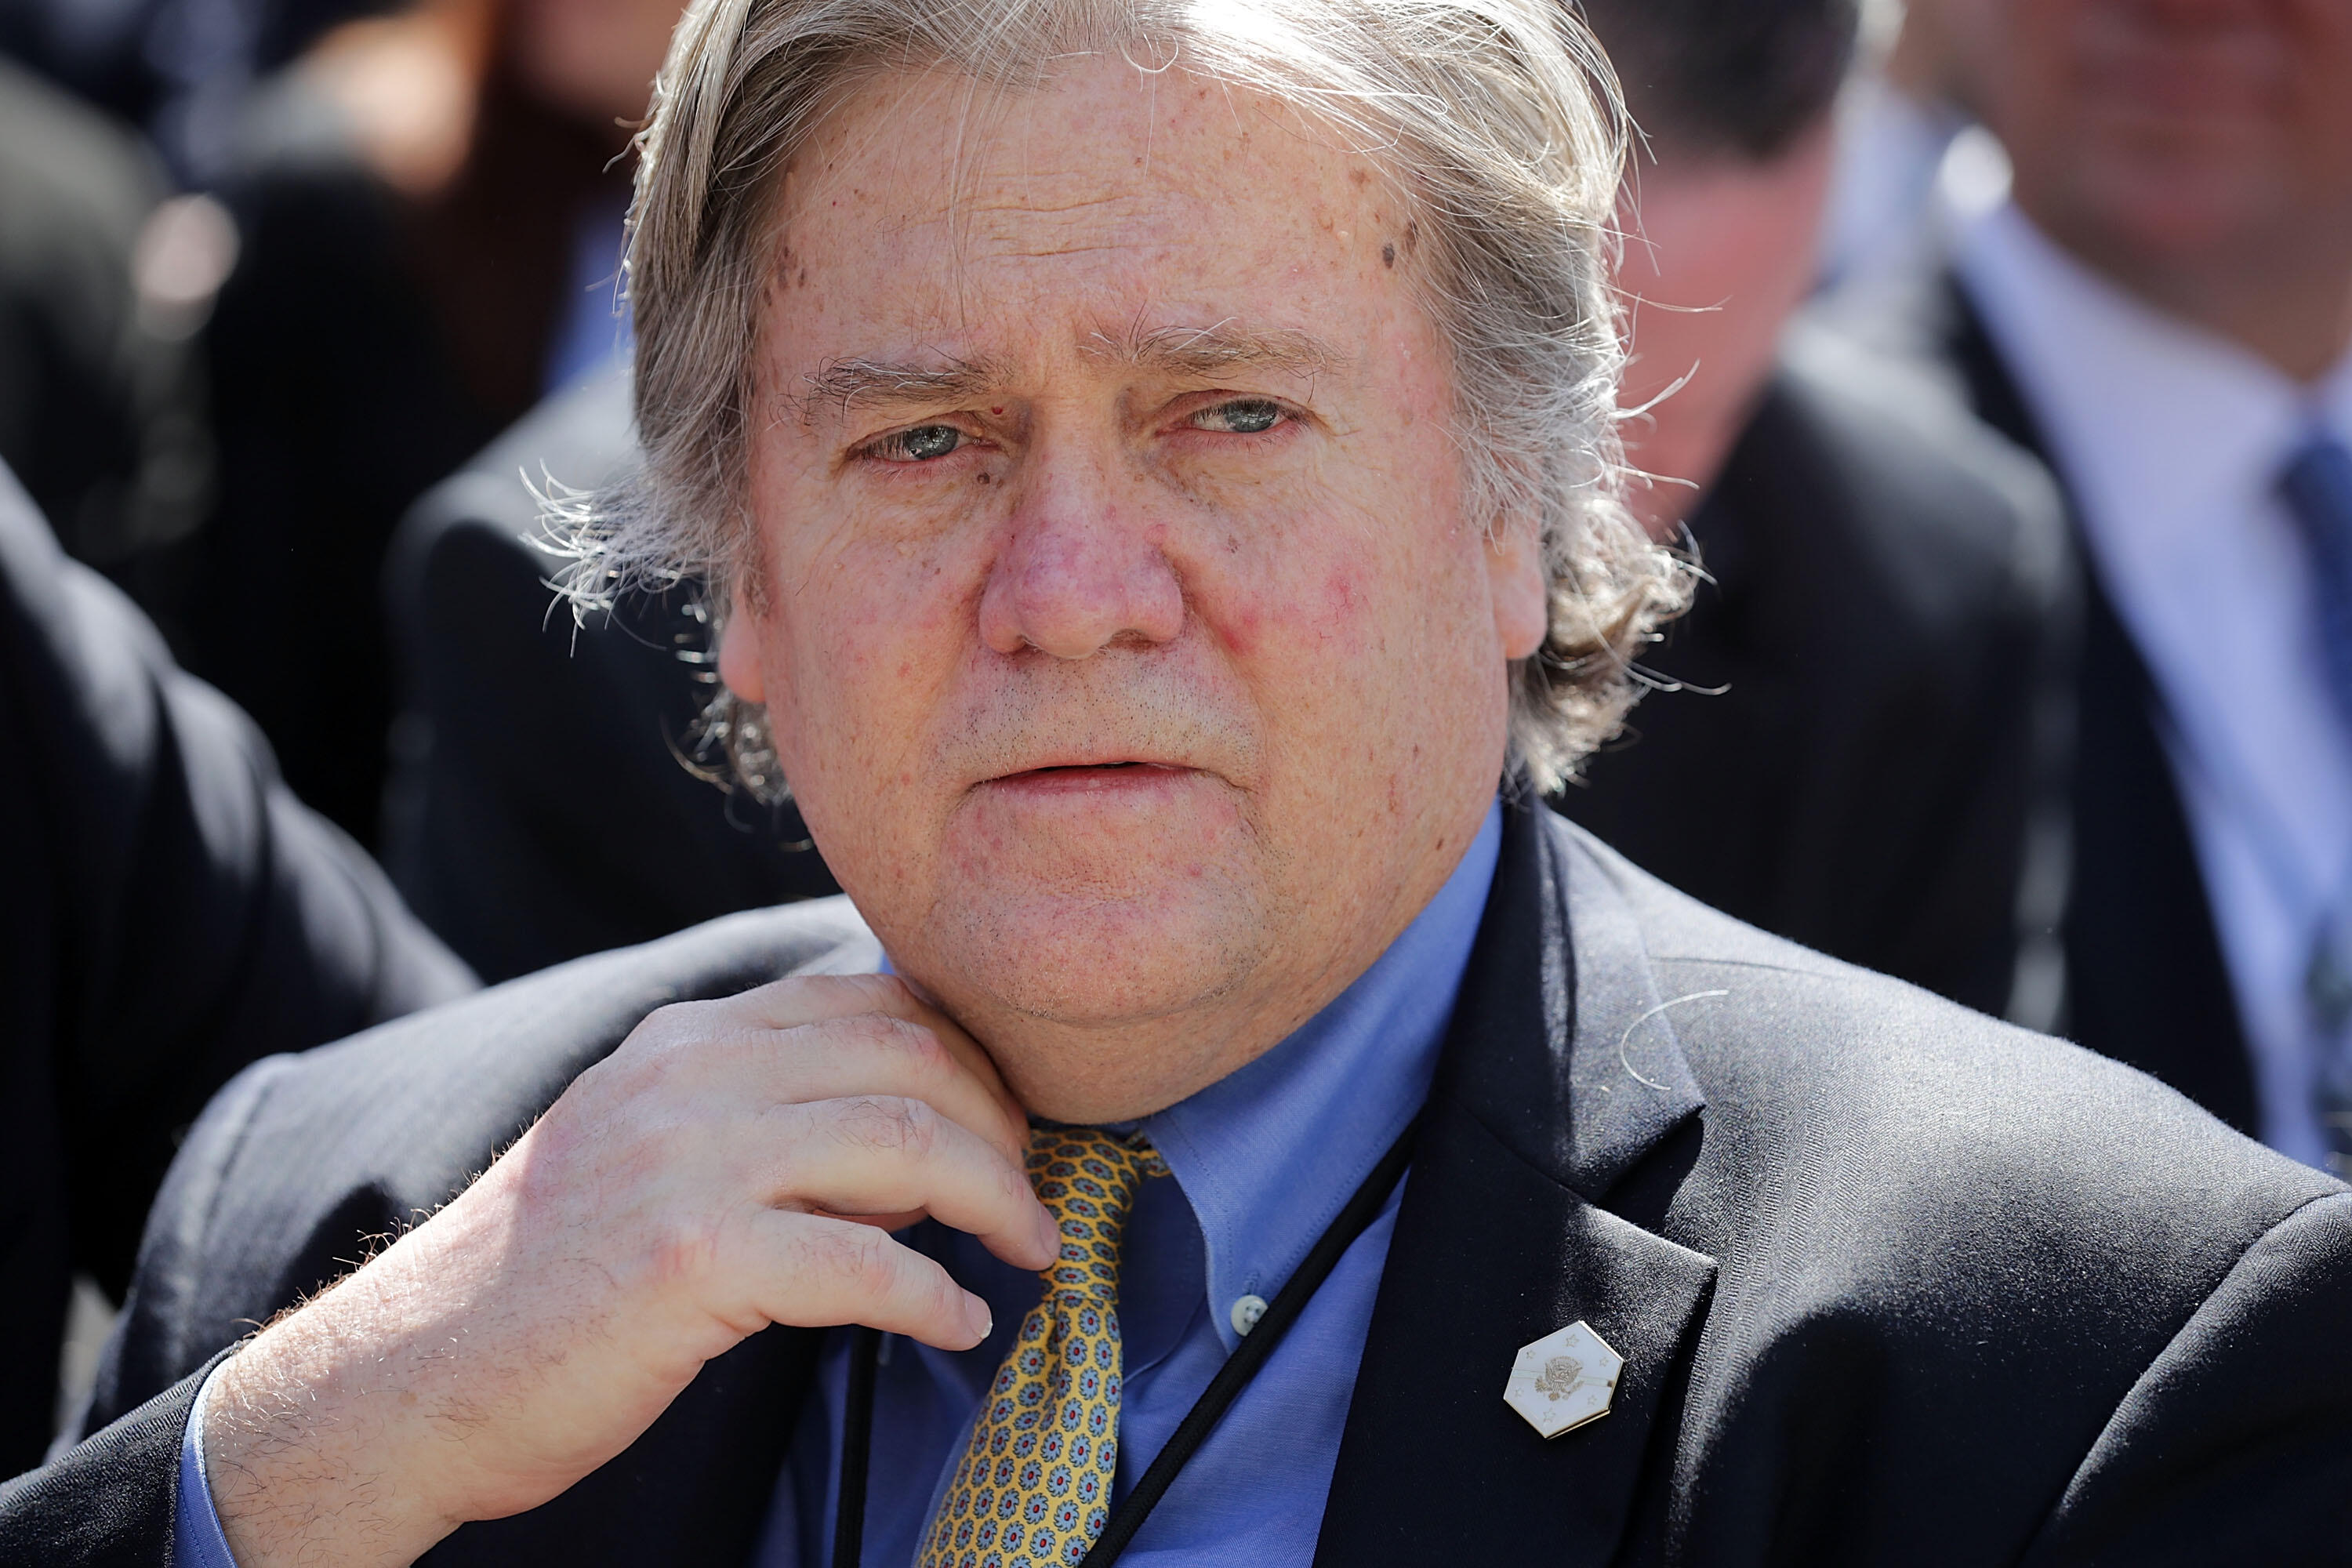 WASHINGTON, DC - APRIL 10: White House Chief Strategist Steve Bannon attends a ceremony in the Rose Garden where Associate Justice Neil Gorsuch was administered the judicial oath at the White House April 10, 2017, in Washington, DC. Earlier in the day Gorsuch, 49, was sworn in as the 113th Associate Justice in a private ceremony at the Supreme Court. (Photo by Chip Somodevilla/Getty Images)